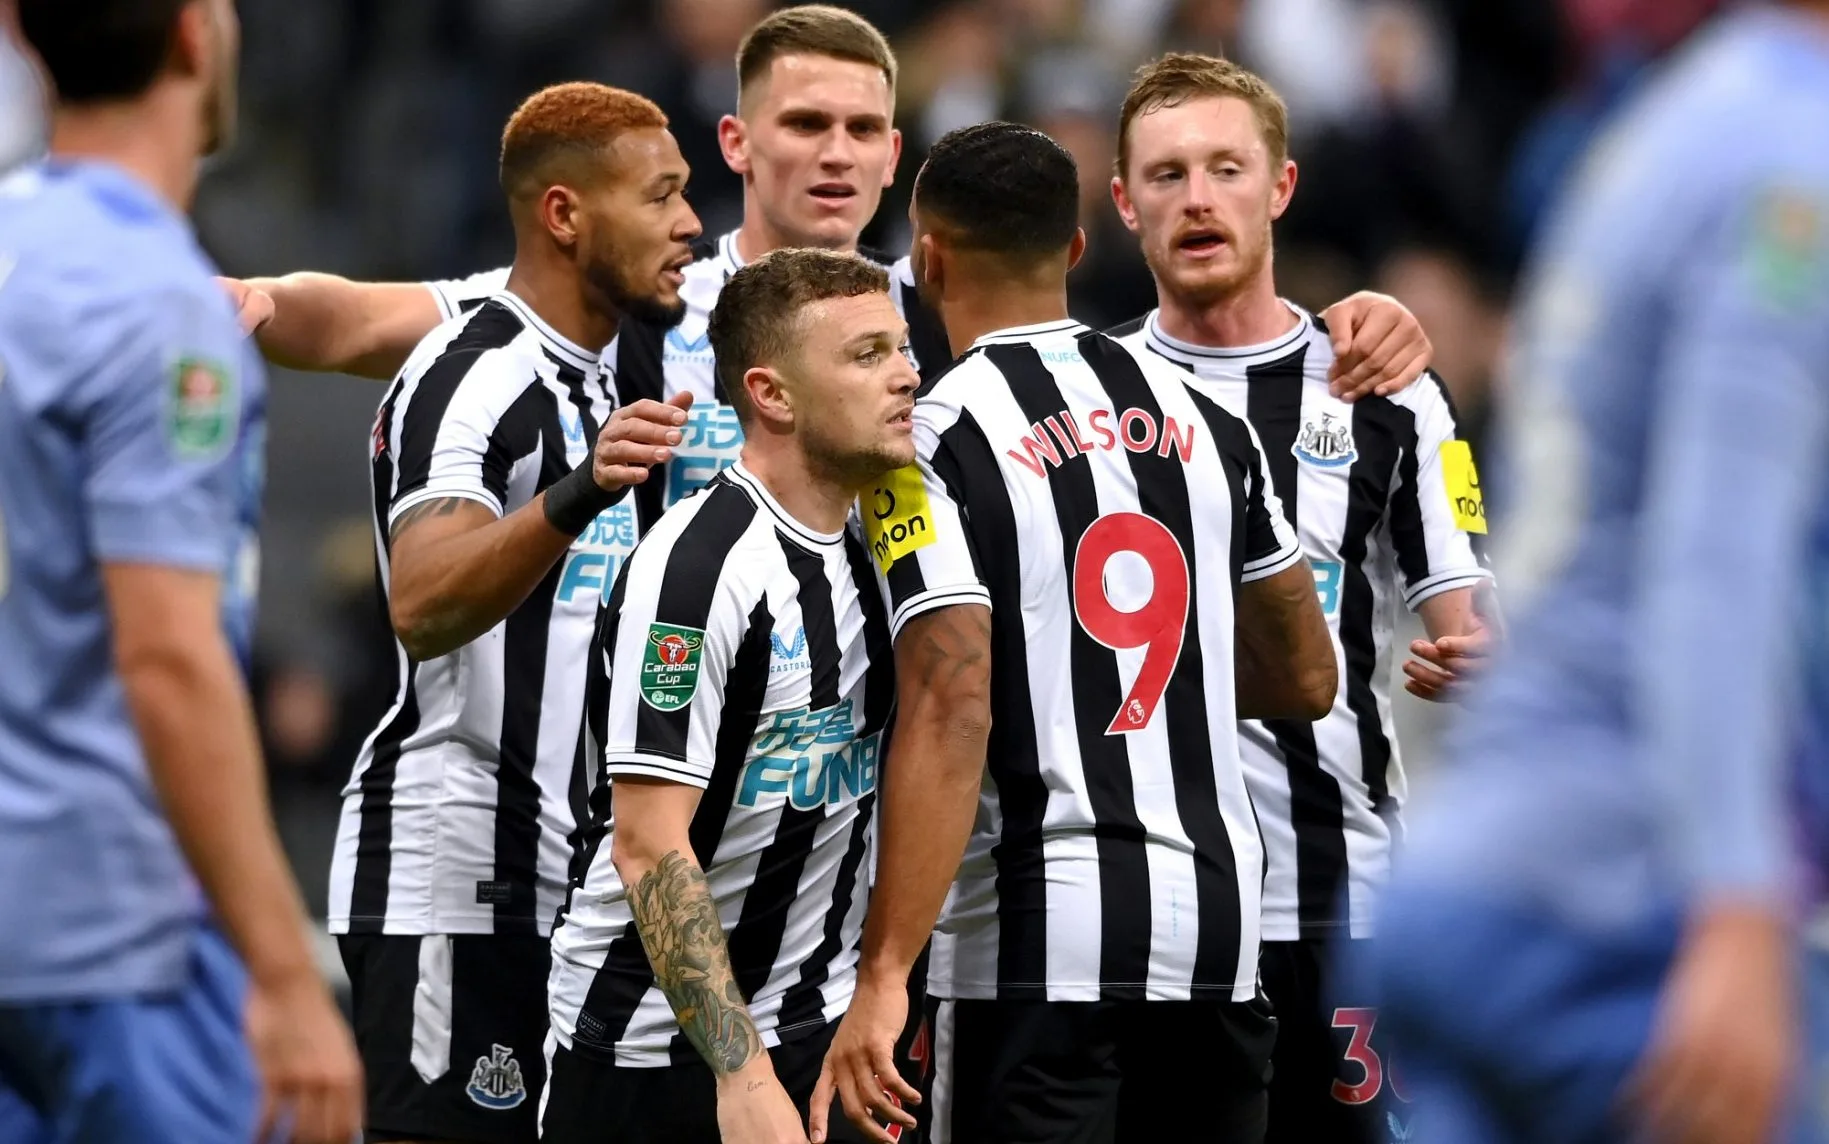 Newcastle remaining games in the Premier League